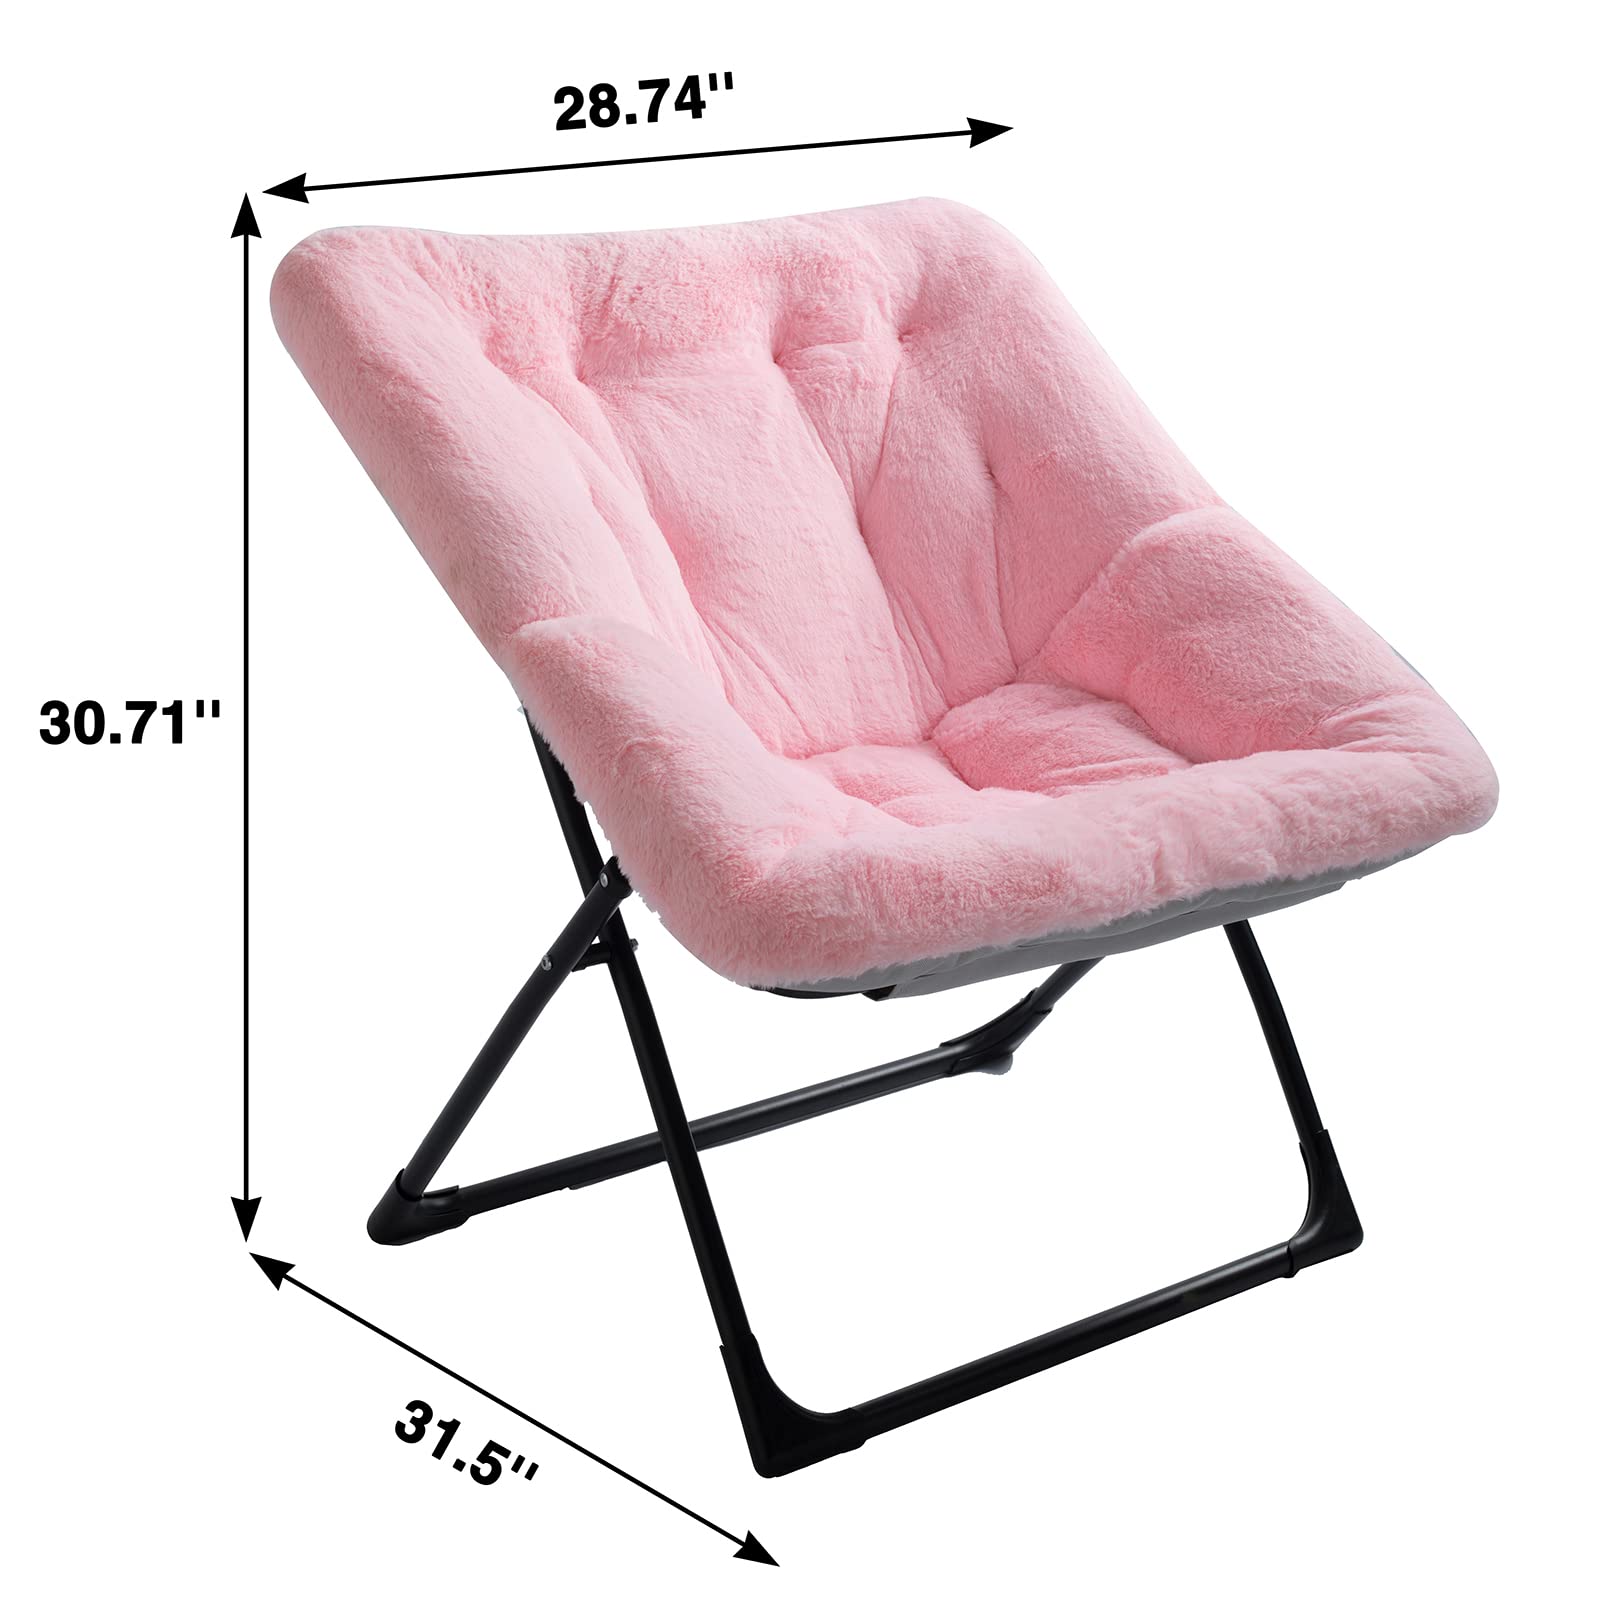 WELL-STRONG Folding Living Room Chair, Faux Fur Foldable Bedroom Chair, Oversized Saucer Chair, Comfy Chair with Metal Frame, Cozy Furry Padded Chair for Home, Bedroom, Living Room Pink